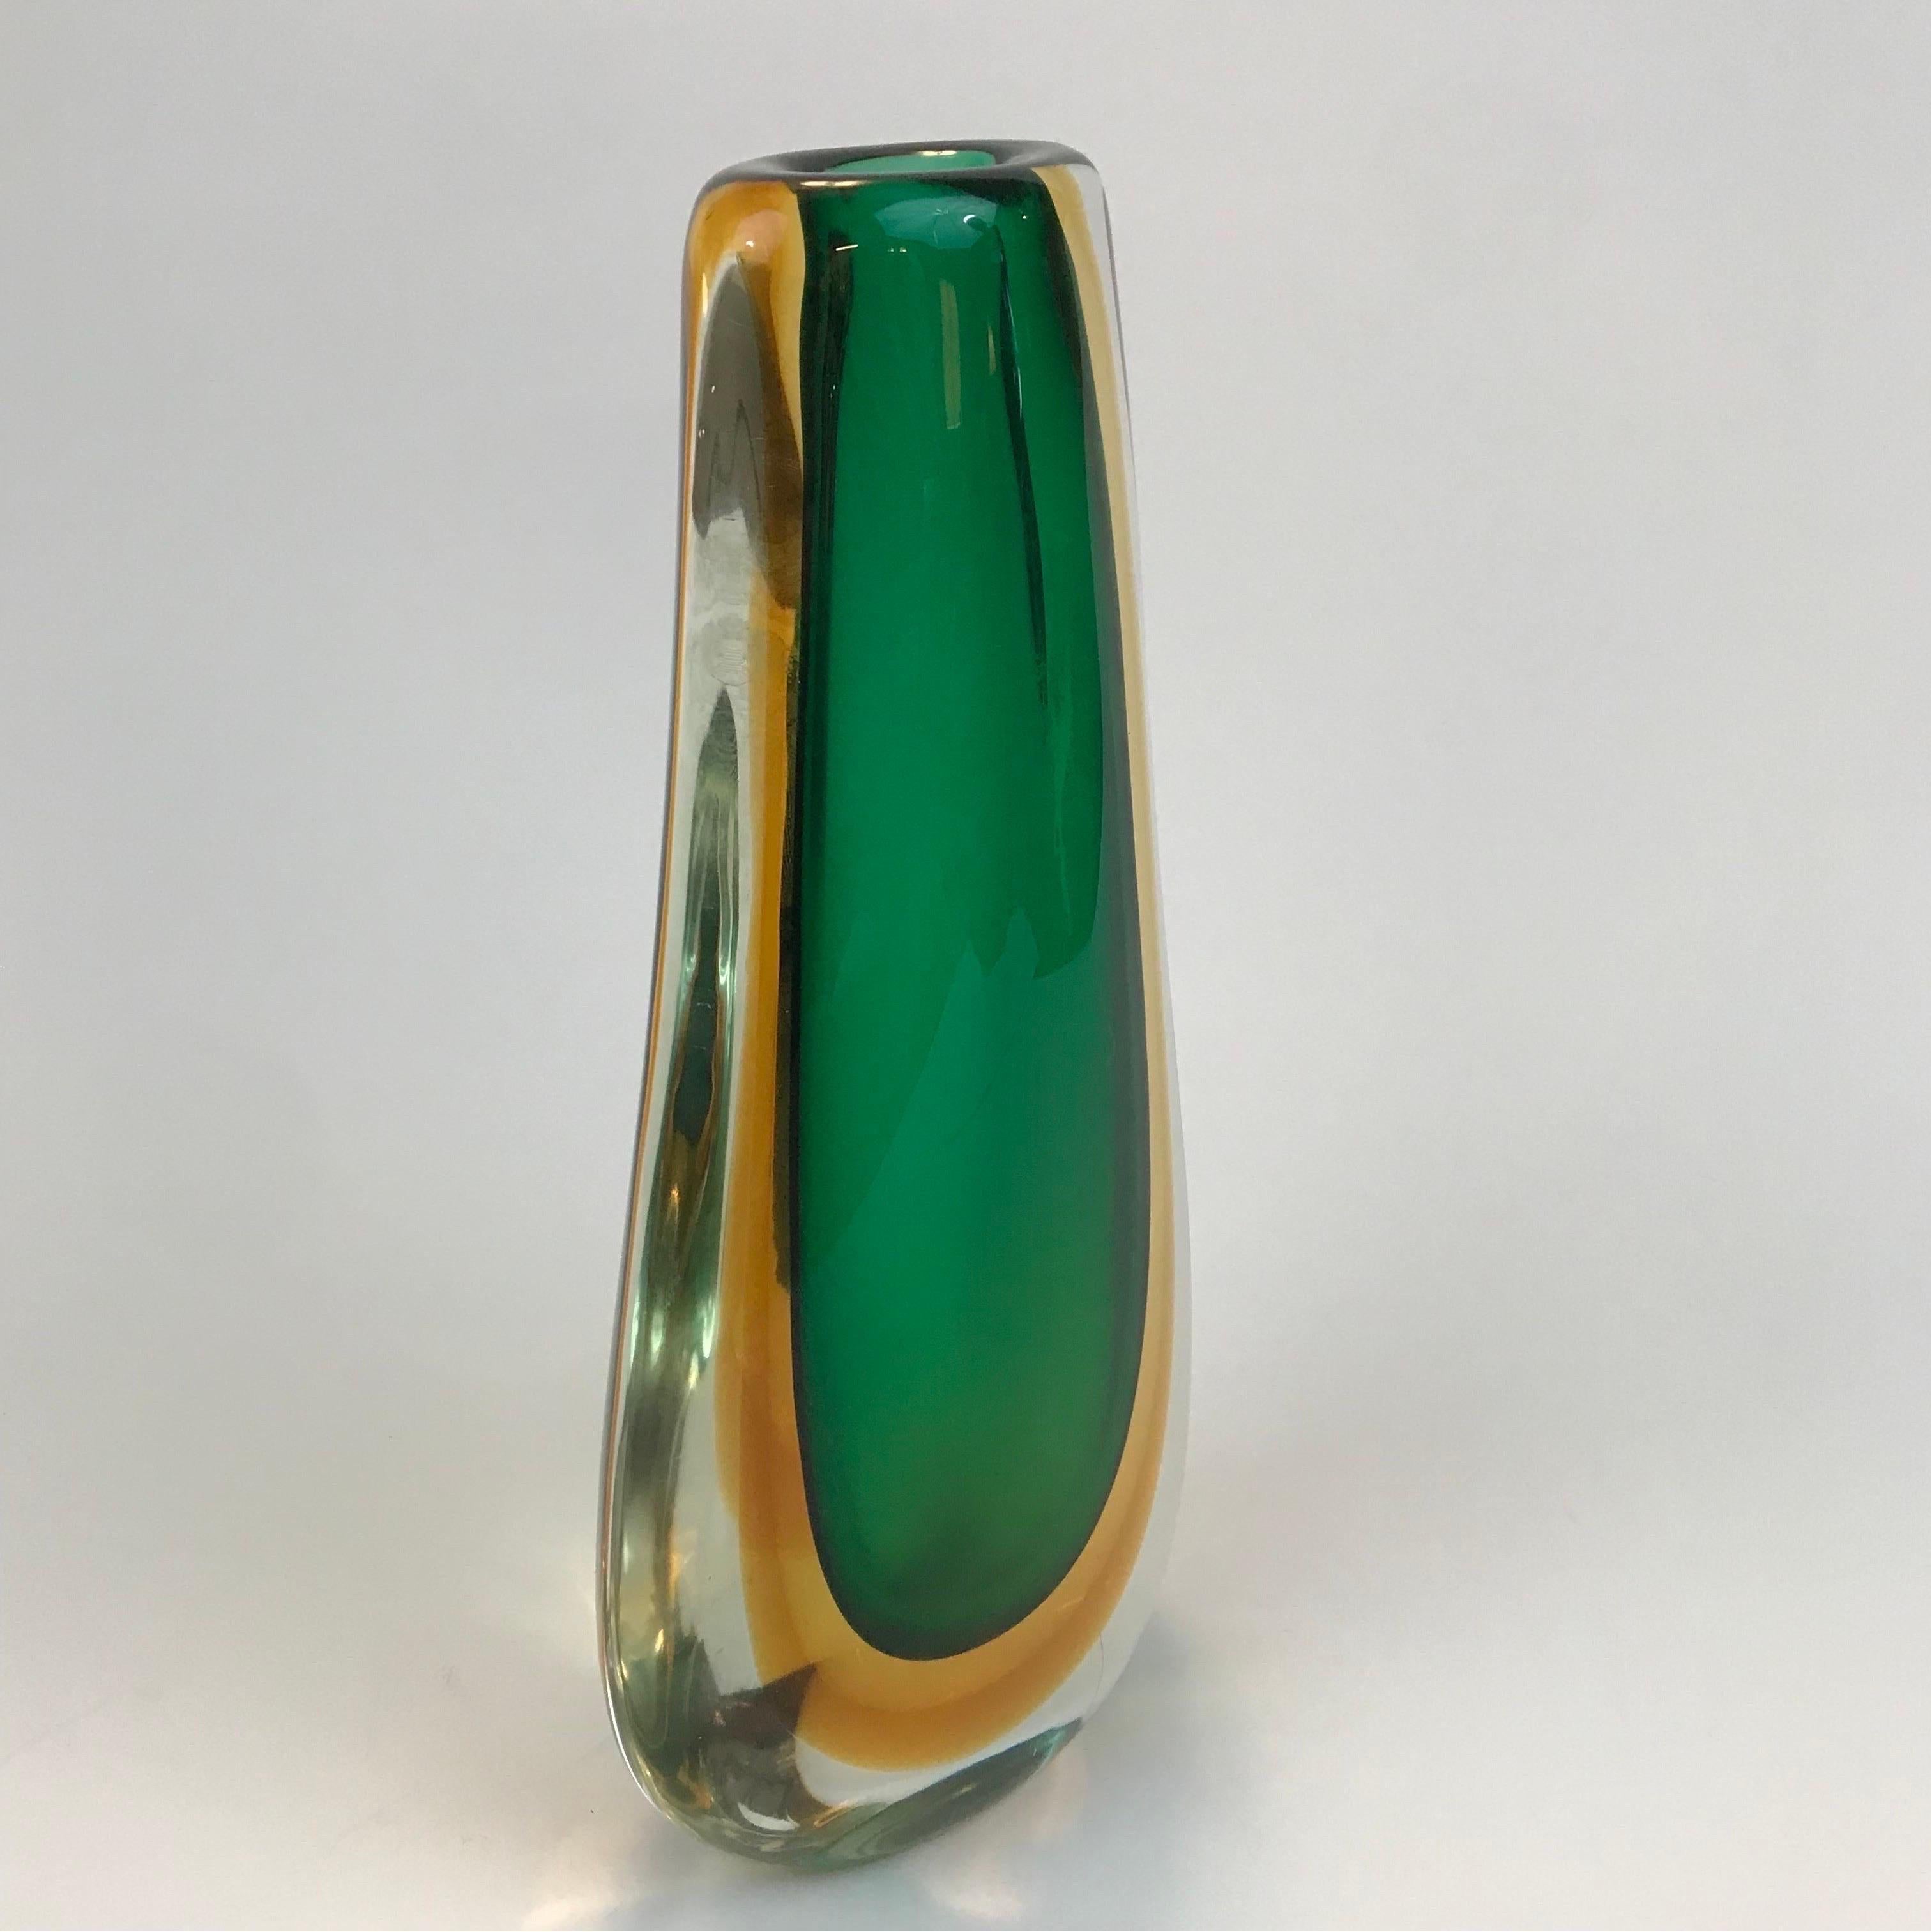 Italian Tall Flavio Poli Sommerso Technique Vase in Clear, Amber and Green Glass For Sale